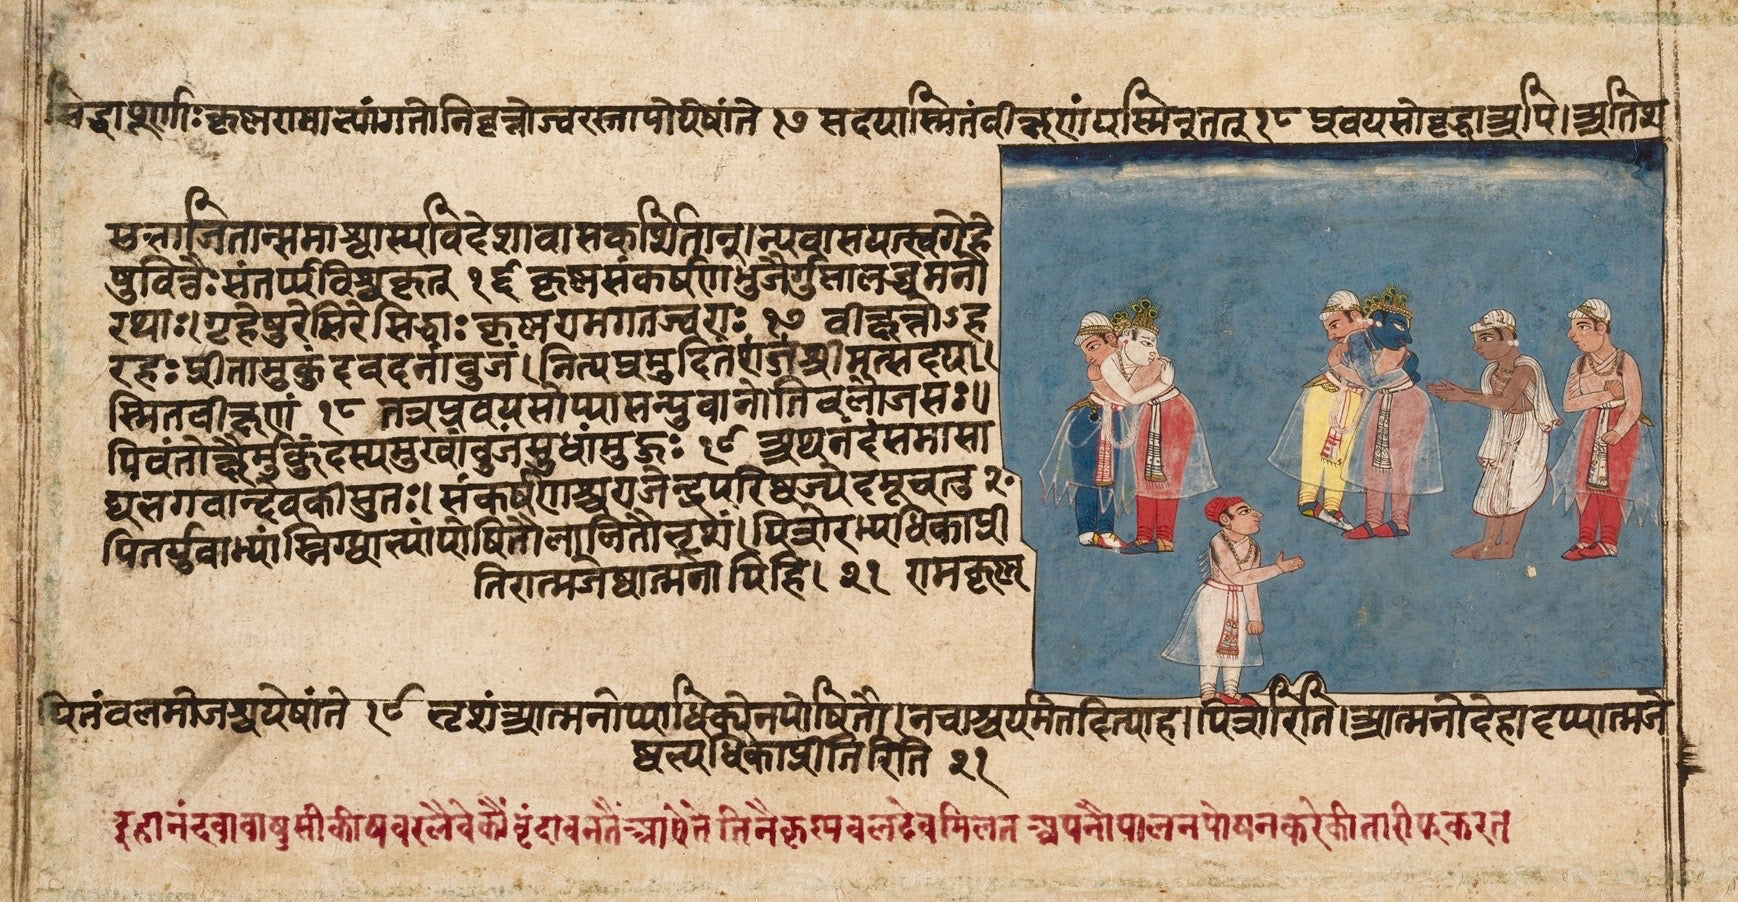 Unraveling the Enigma: Why Sanskrit, the Oldest Language, is Considered the Most Advanced